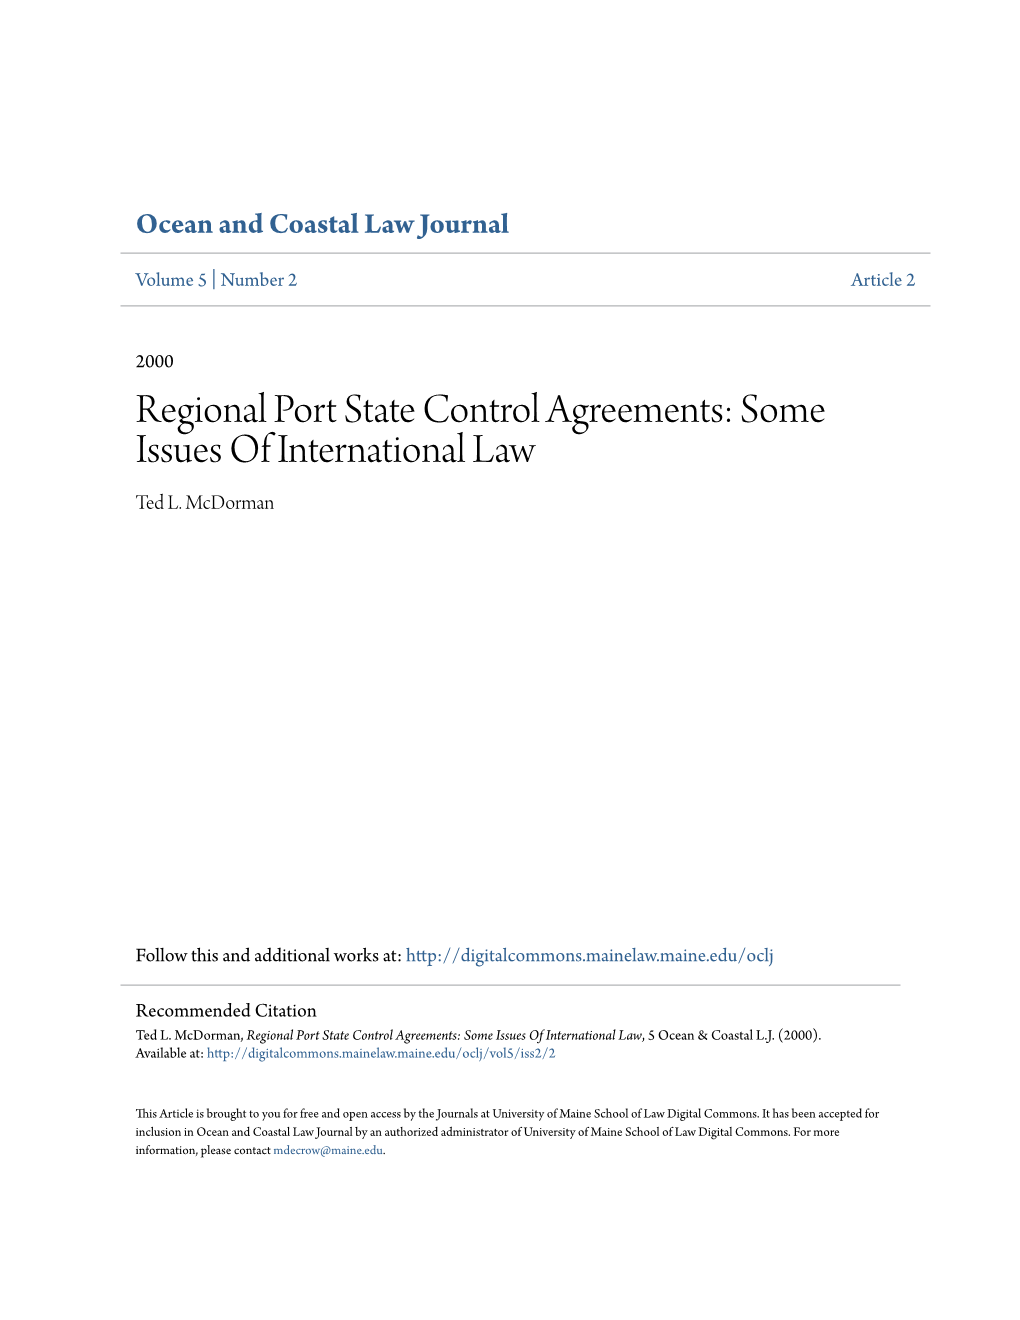 Regional Port State Control Agreements: Some Issues of International Law Ted L